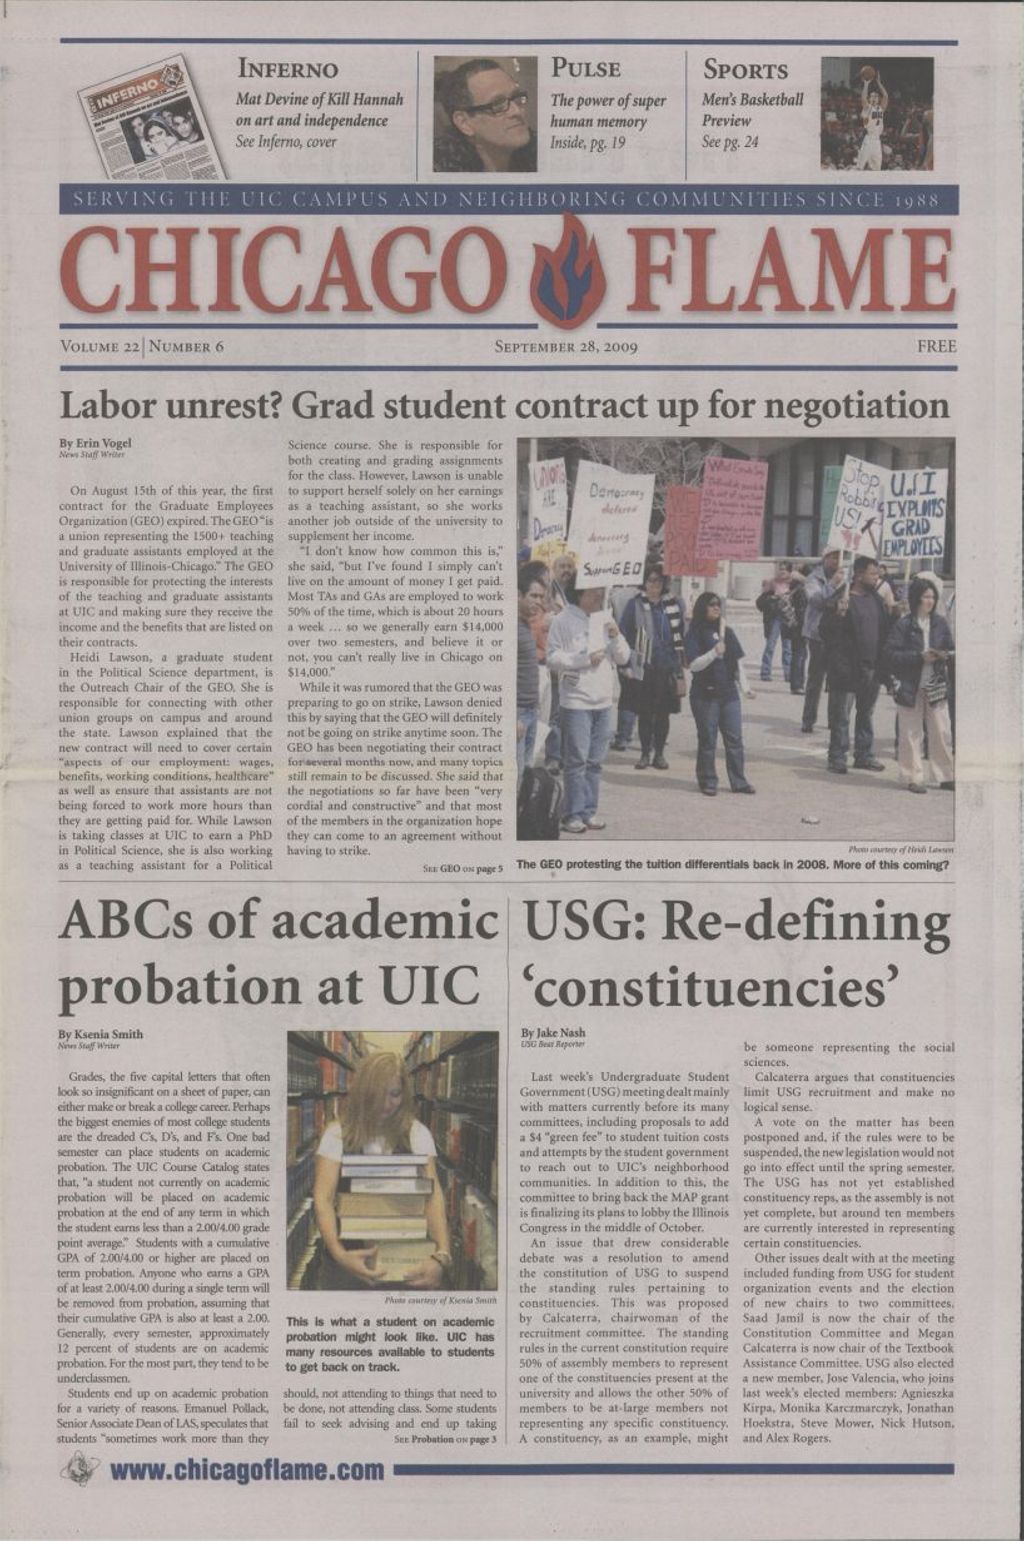 Miniature of Chicago Flame (September 28, 2009)